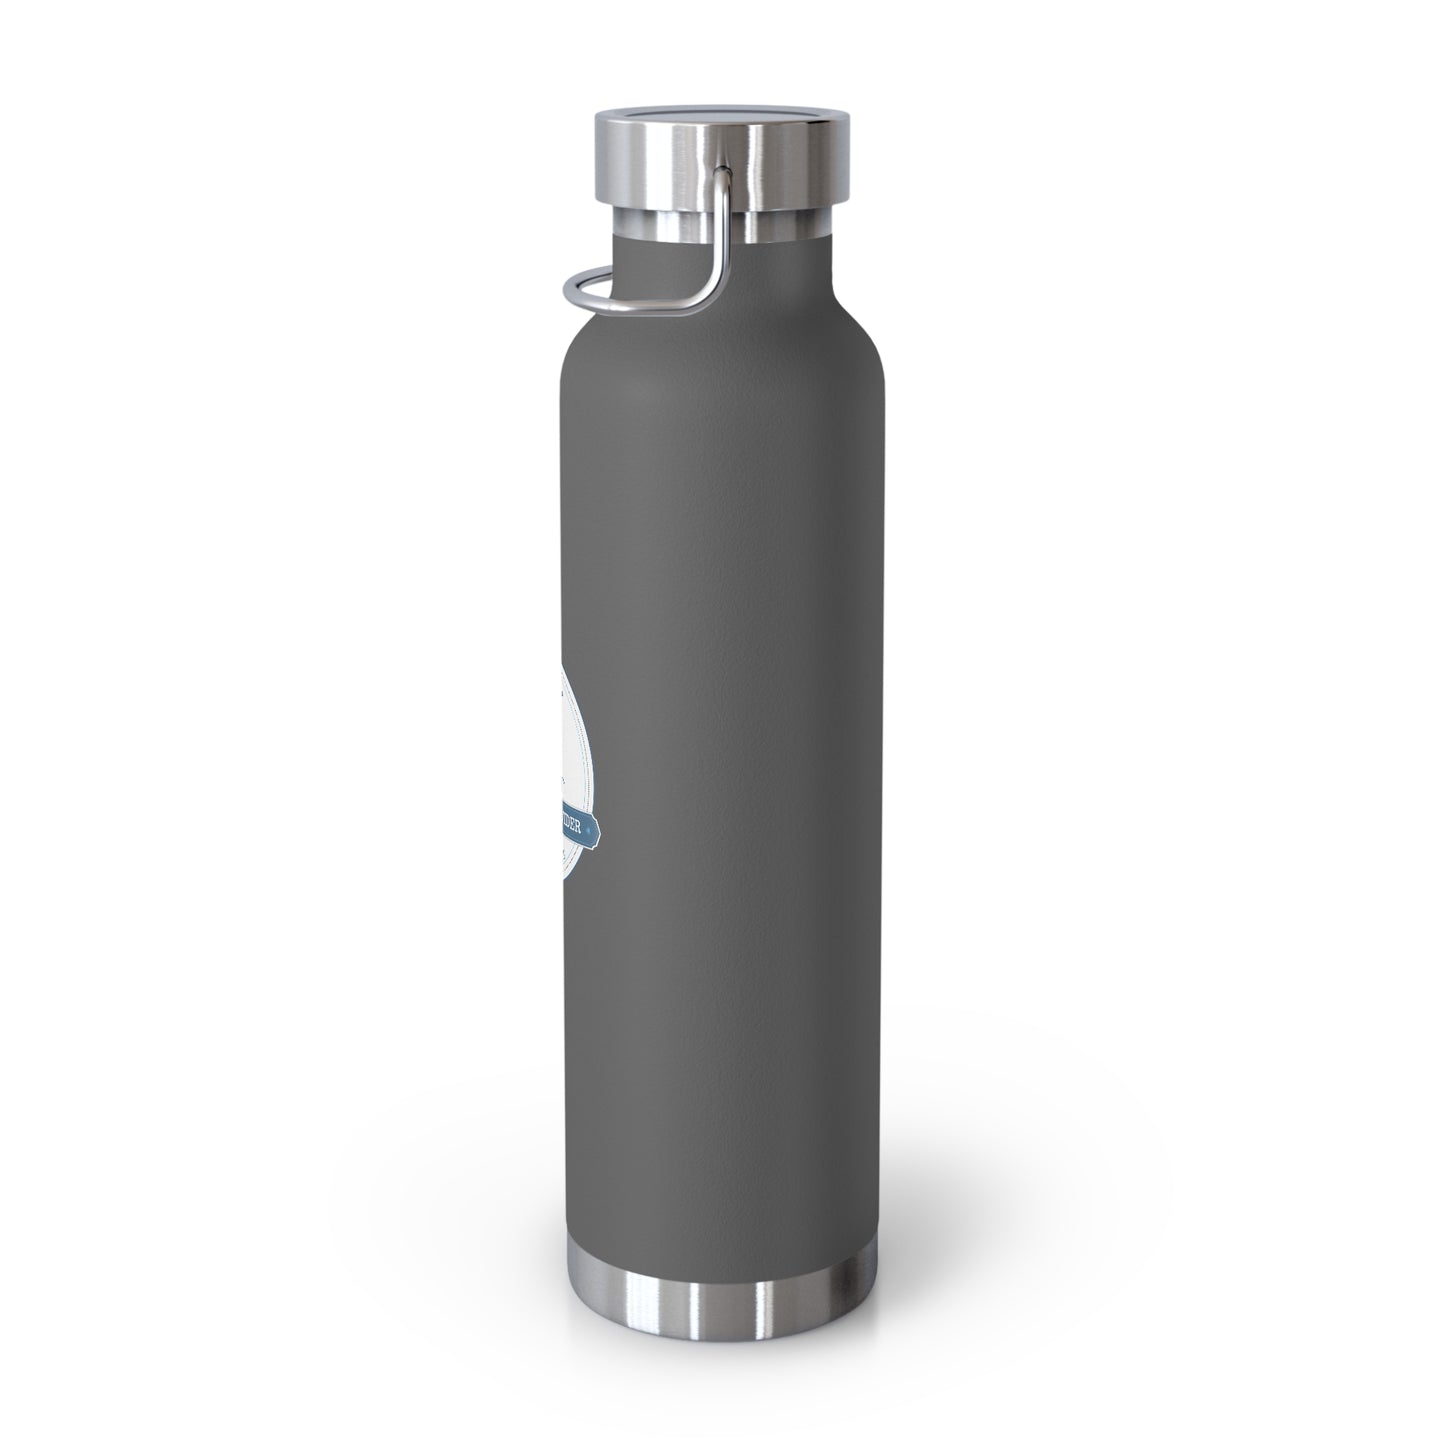 Thermal bottle | Provides 4 years of clean water for 4 people | Impactive | Mug